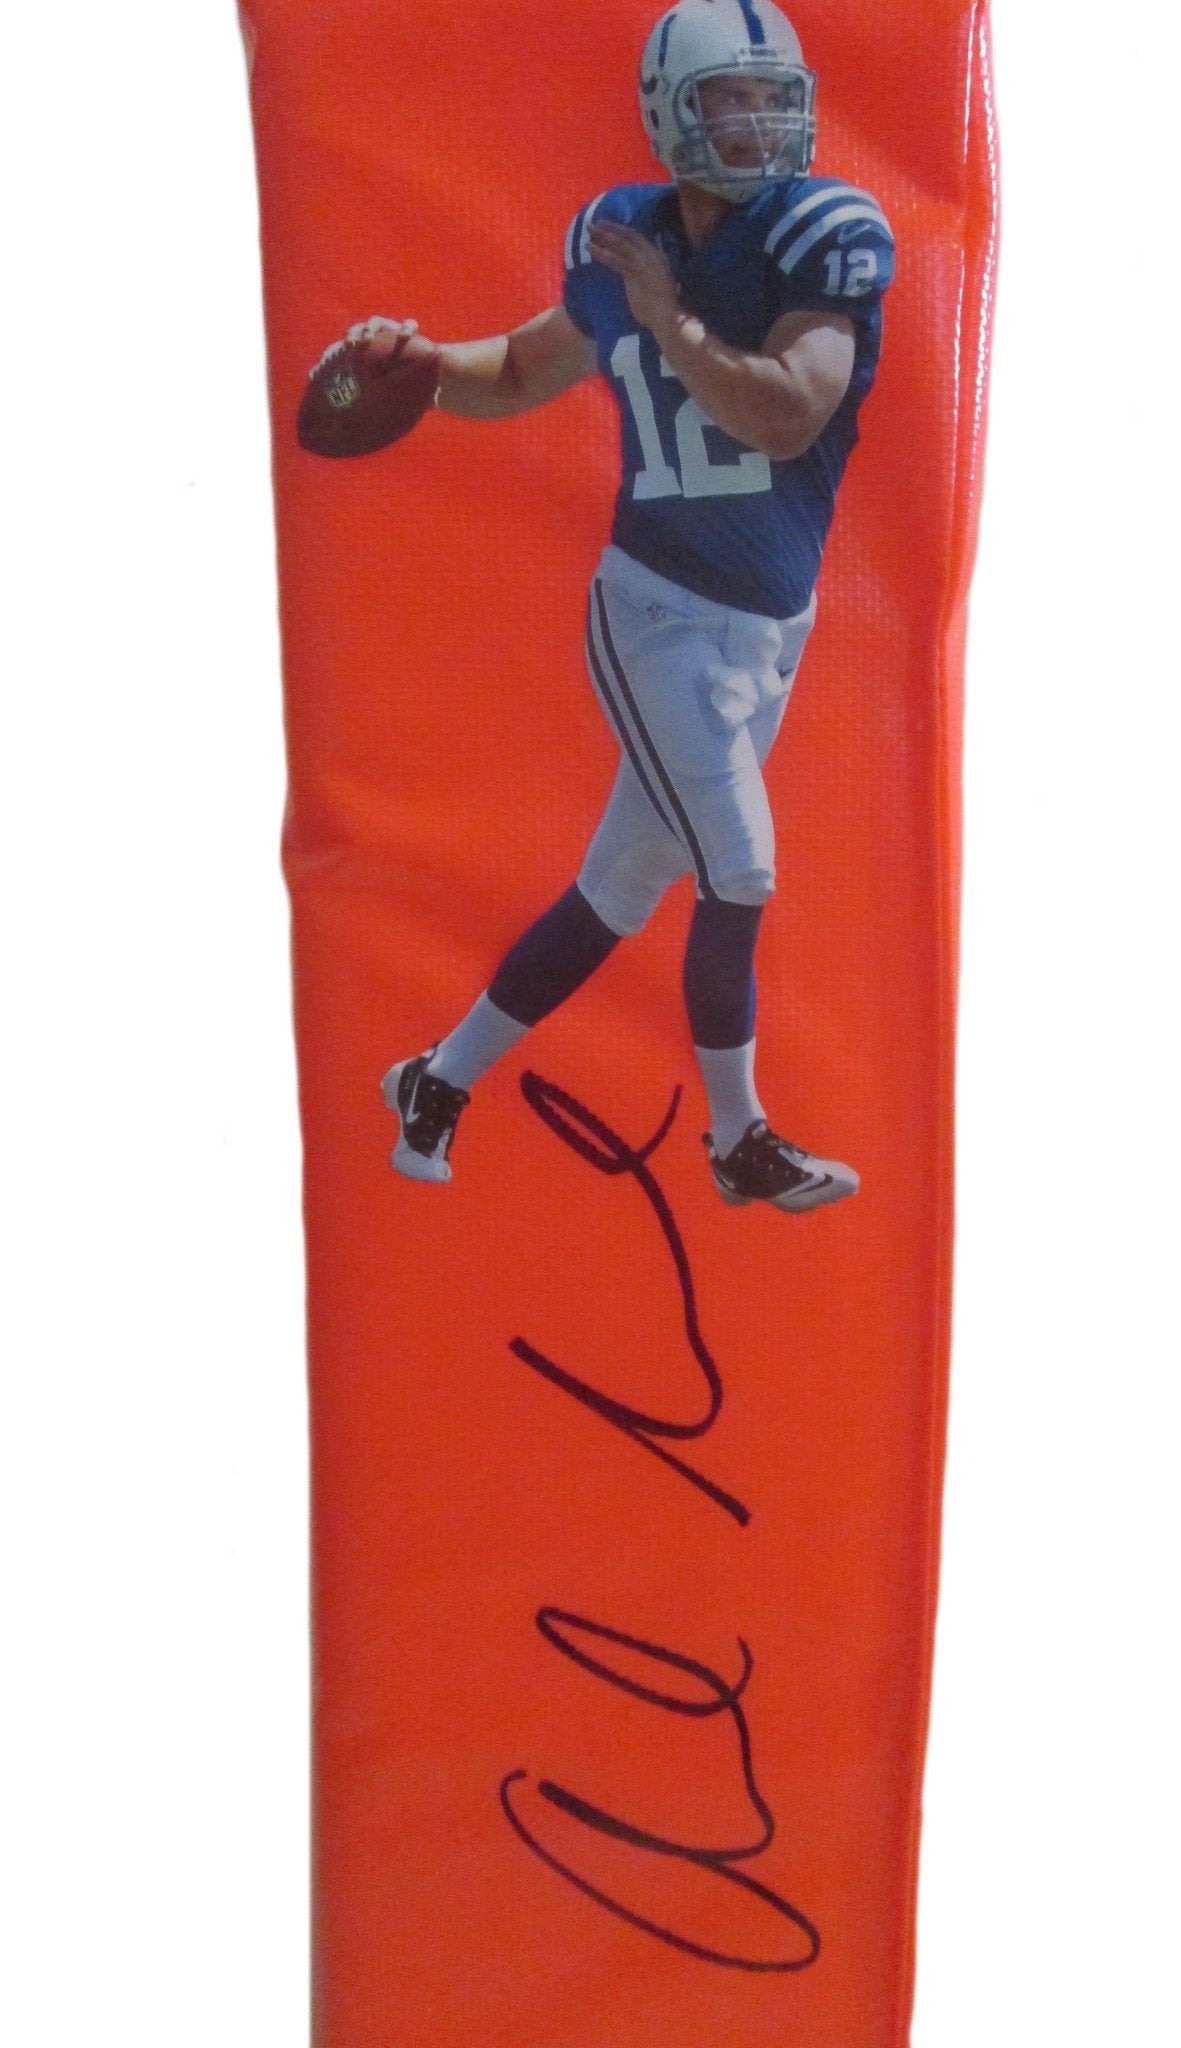 Football End Zone Pylons- Autographed- Andrew Luck Signed Indianapolis Colts TD Pylon PSA/DNA 2